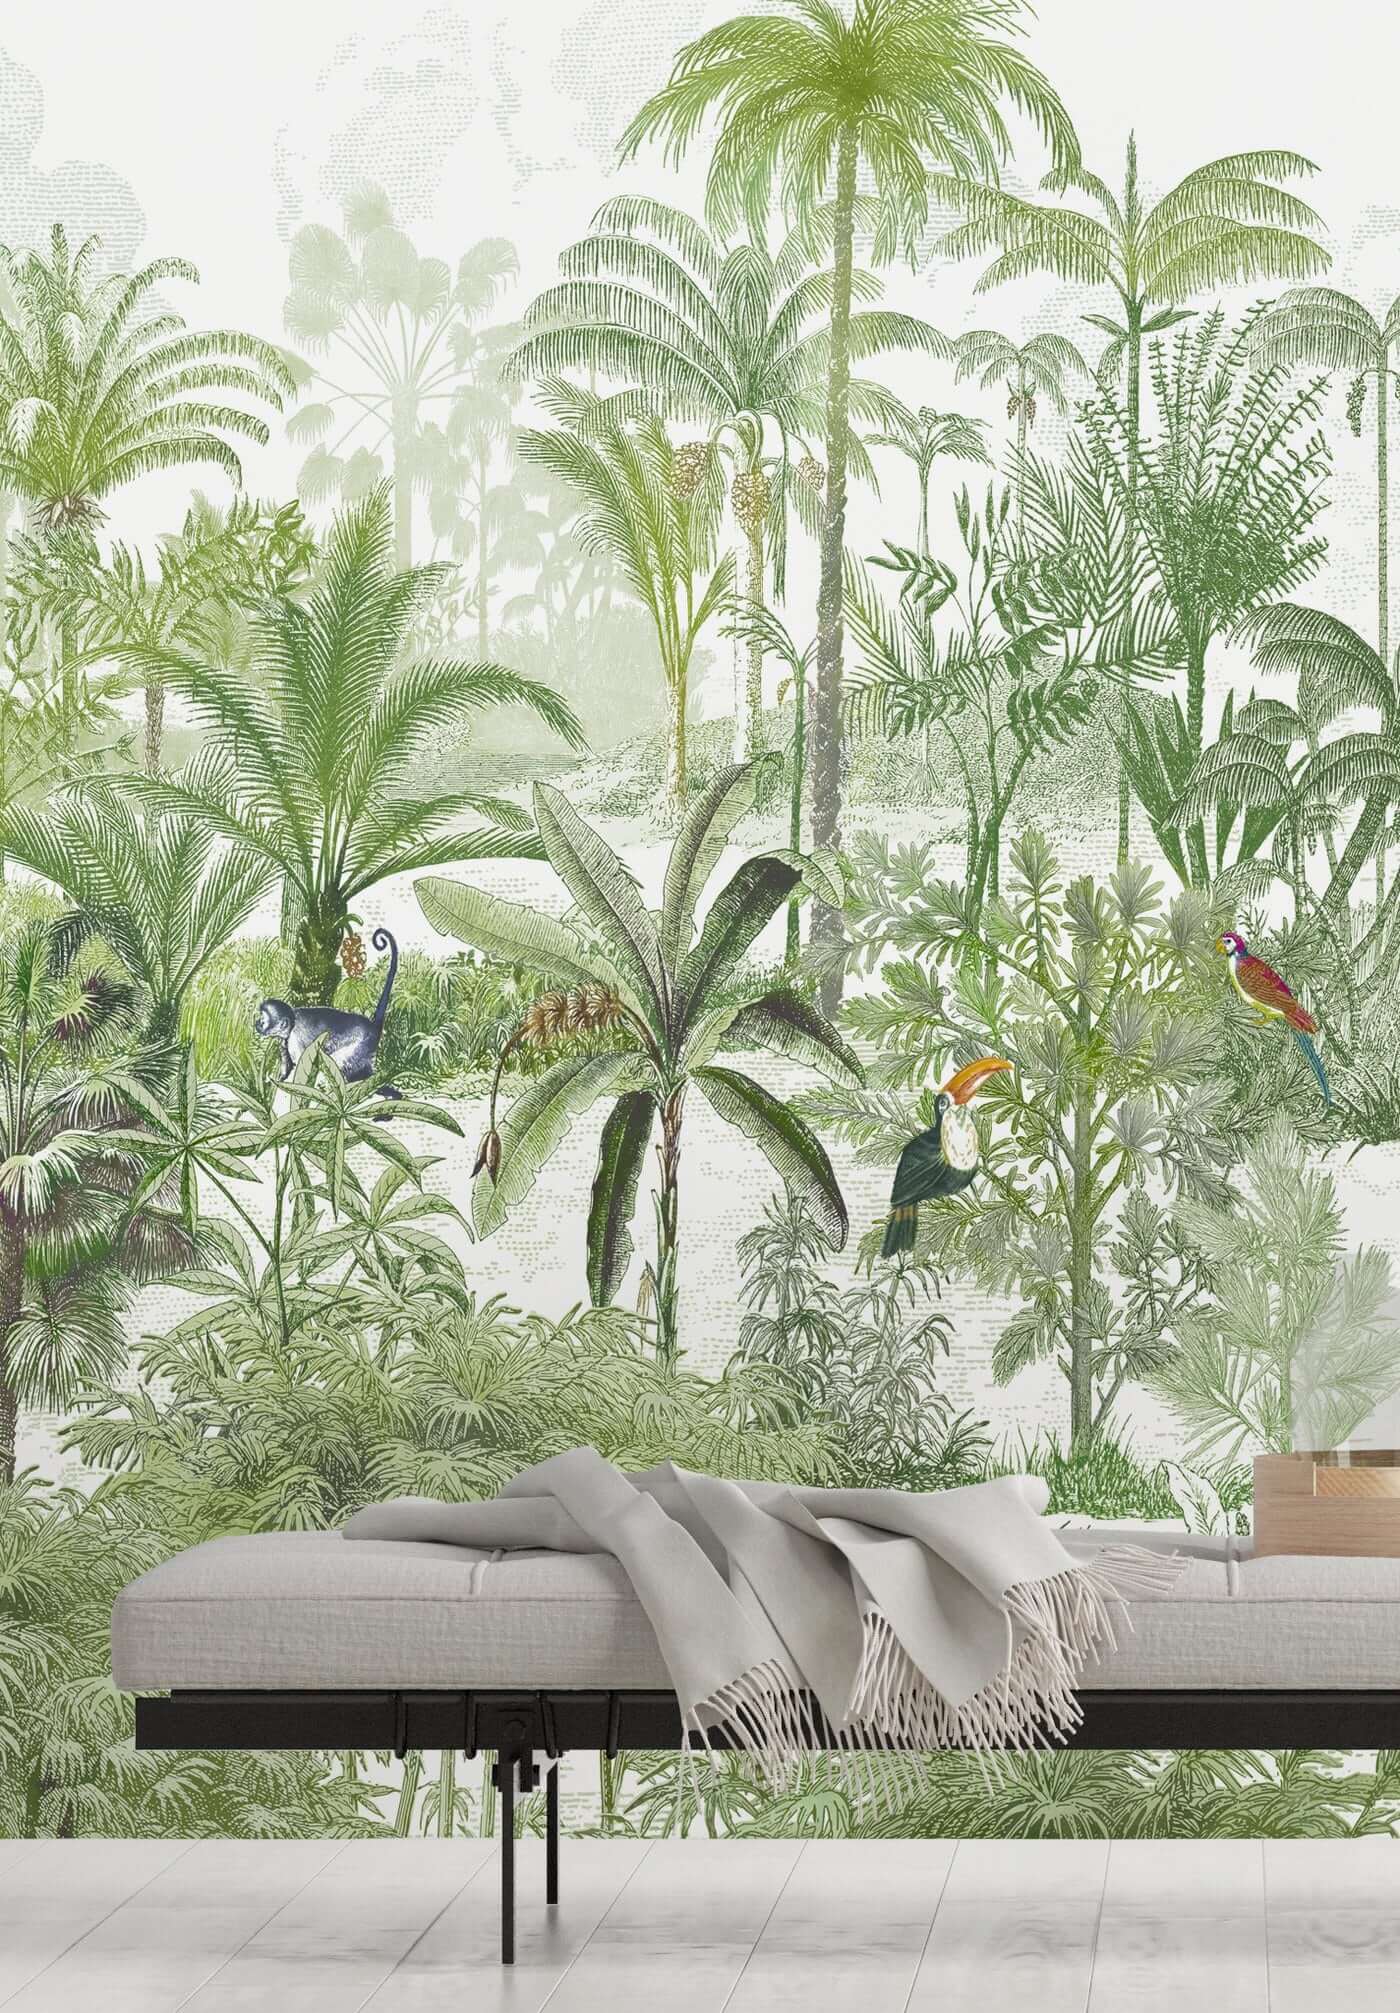 Design Made In France - Exquisite Panoramic Wall Murals For Your Next Interior Renovation